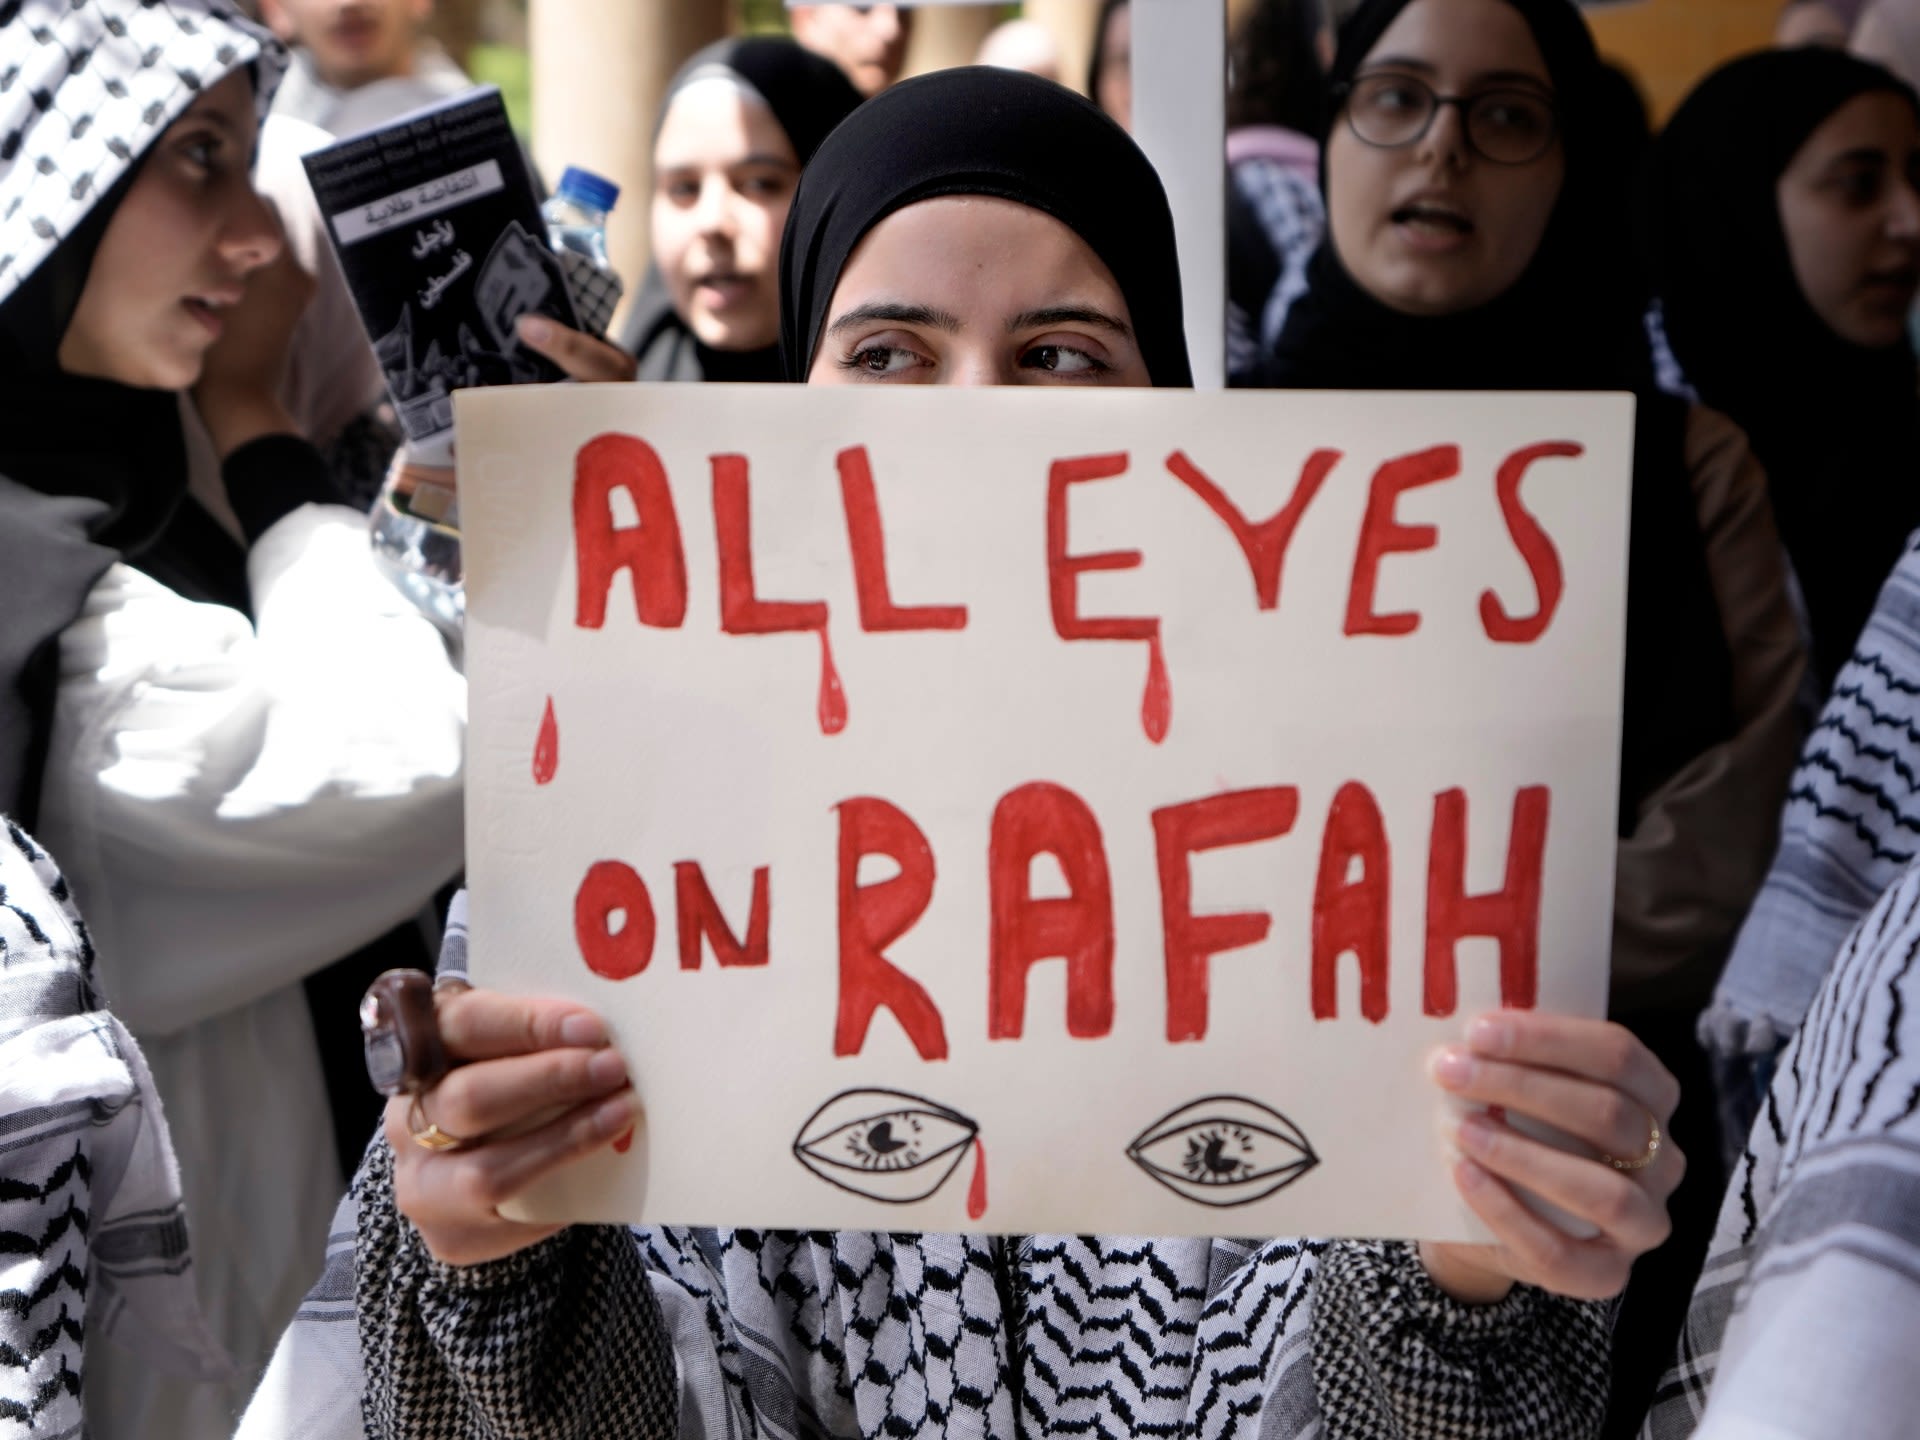 What is ‘All eyes on Rafah’? Decoding a viral social trend on Israel’s war